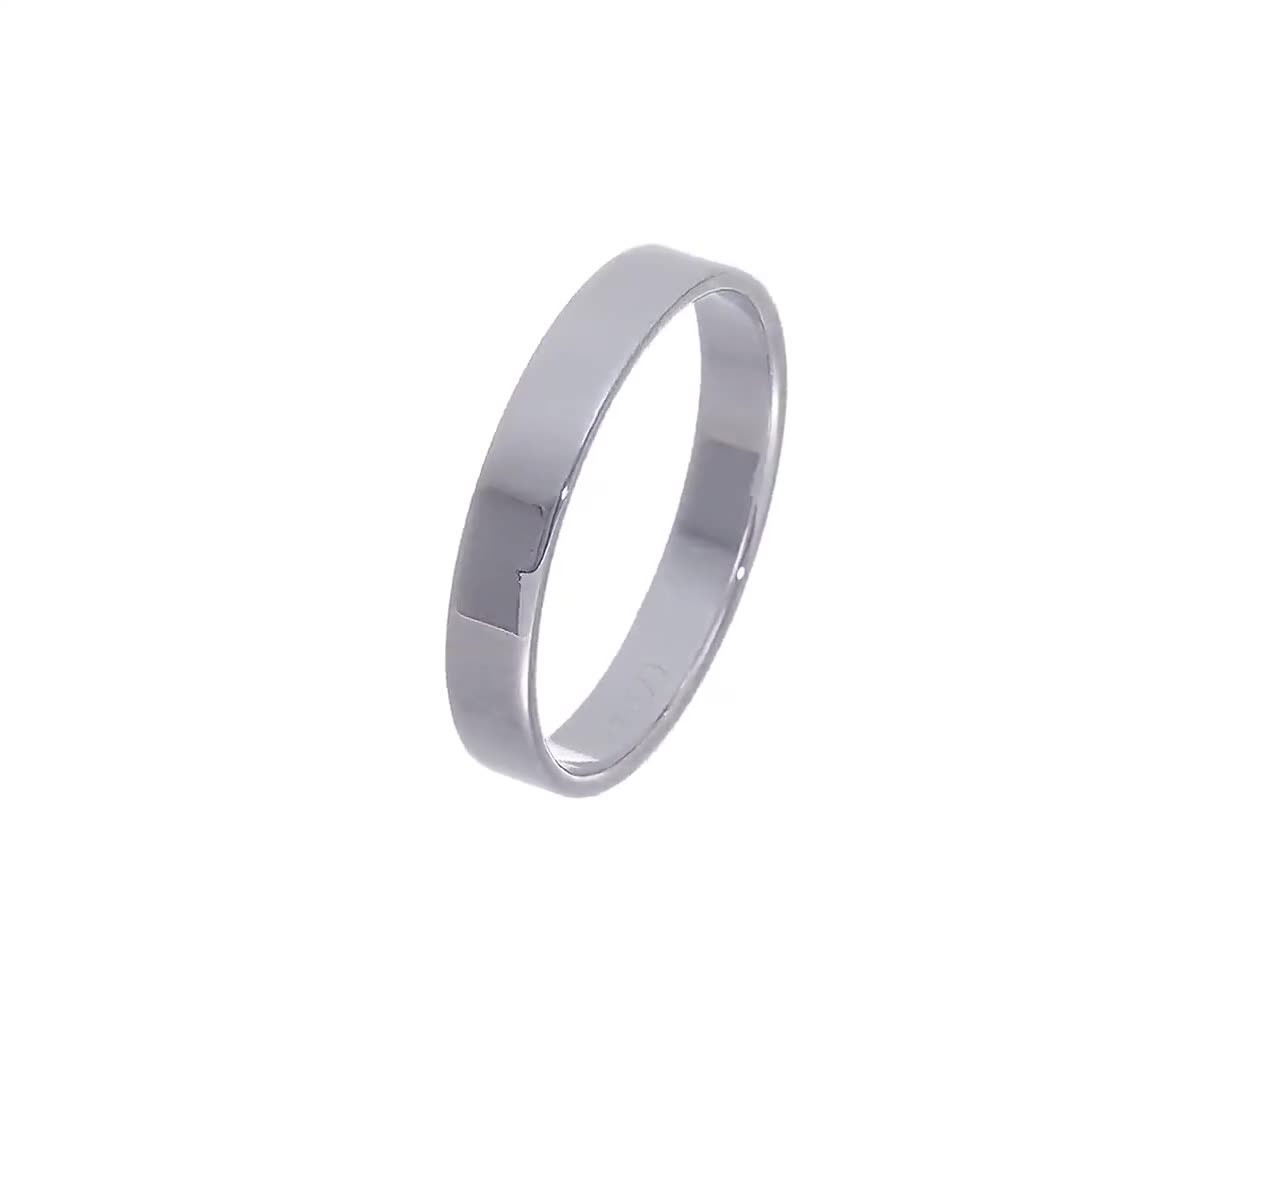 10K Solid White Gold 4mm Flat Men's and Women's Wedding Band Ring Sizes  4-14. Solid 10k White Gold, Made in the U.S.A.